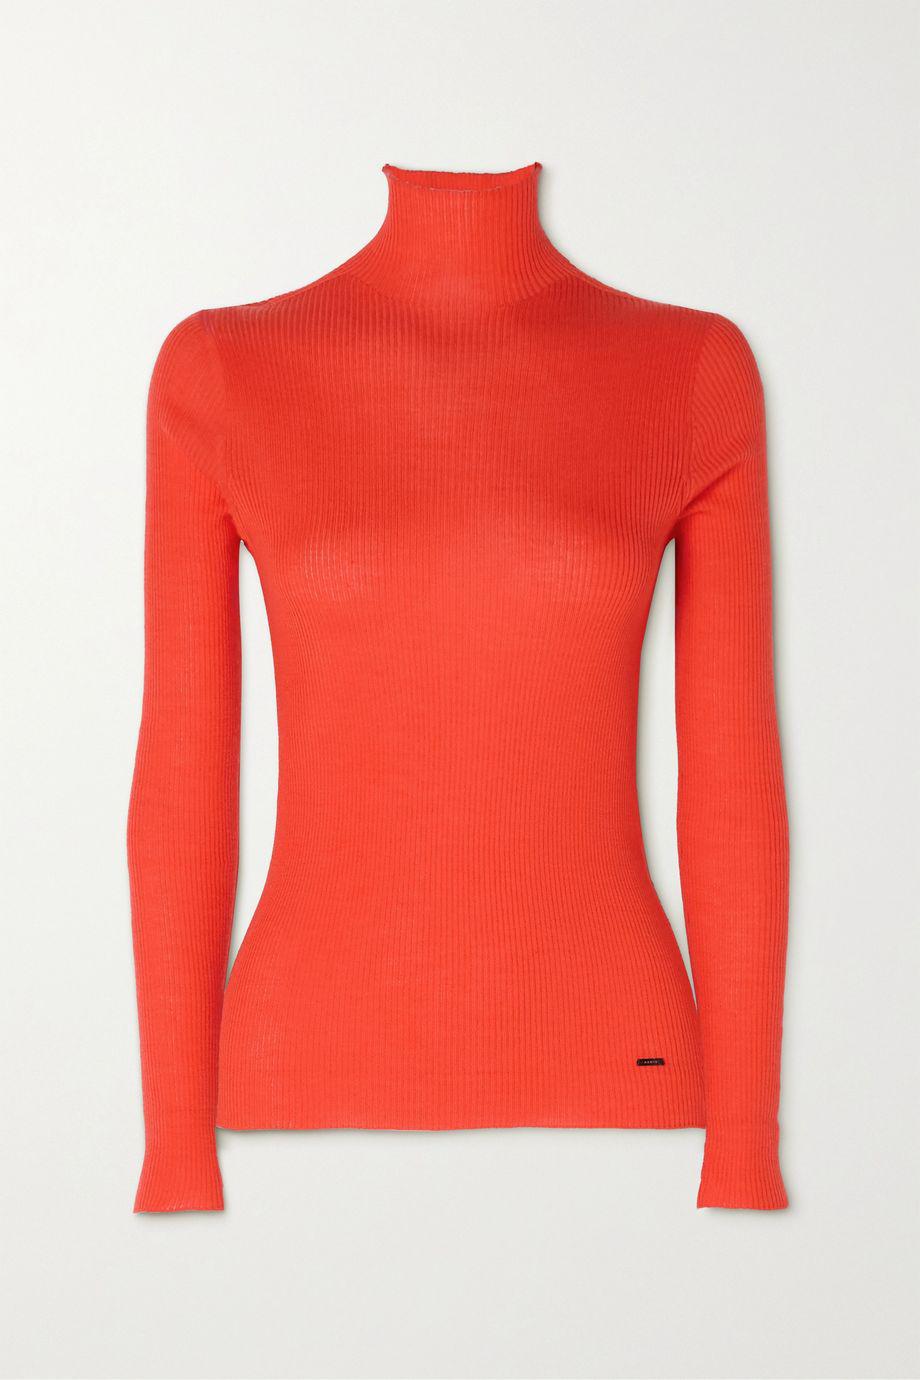 Ribbed cashmere and silk-blend turtleneck sweater by AKRIS